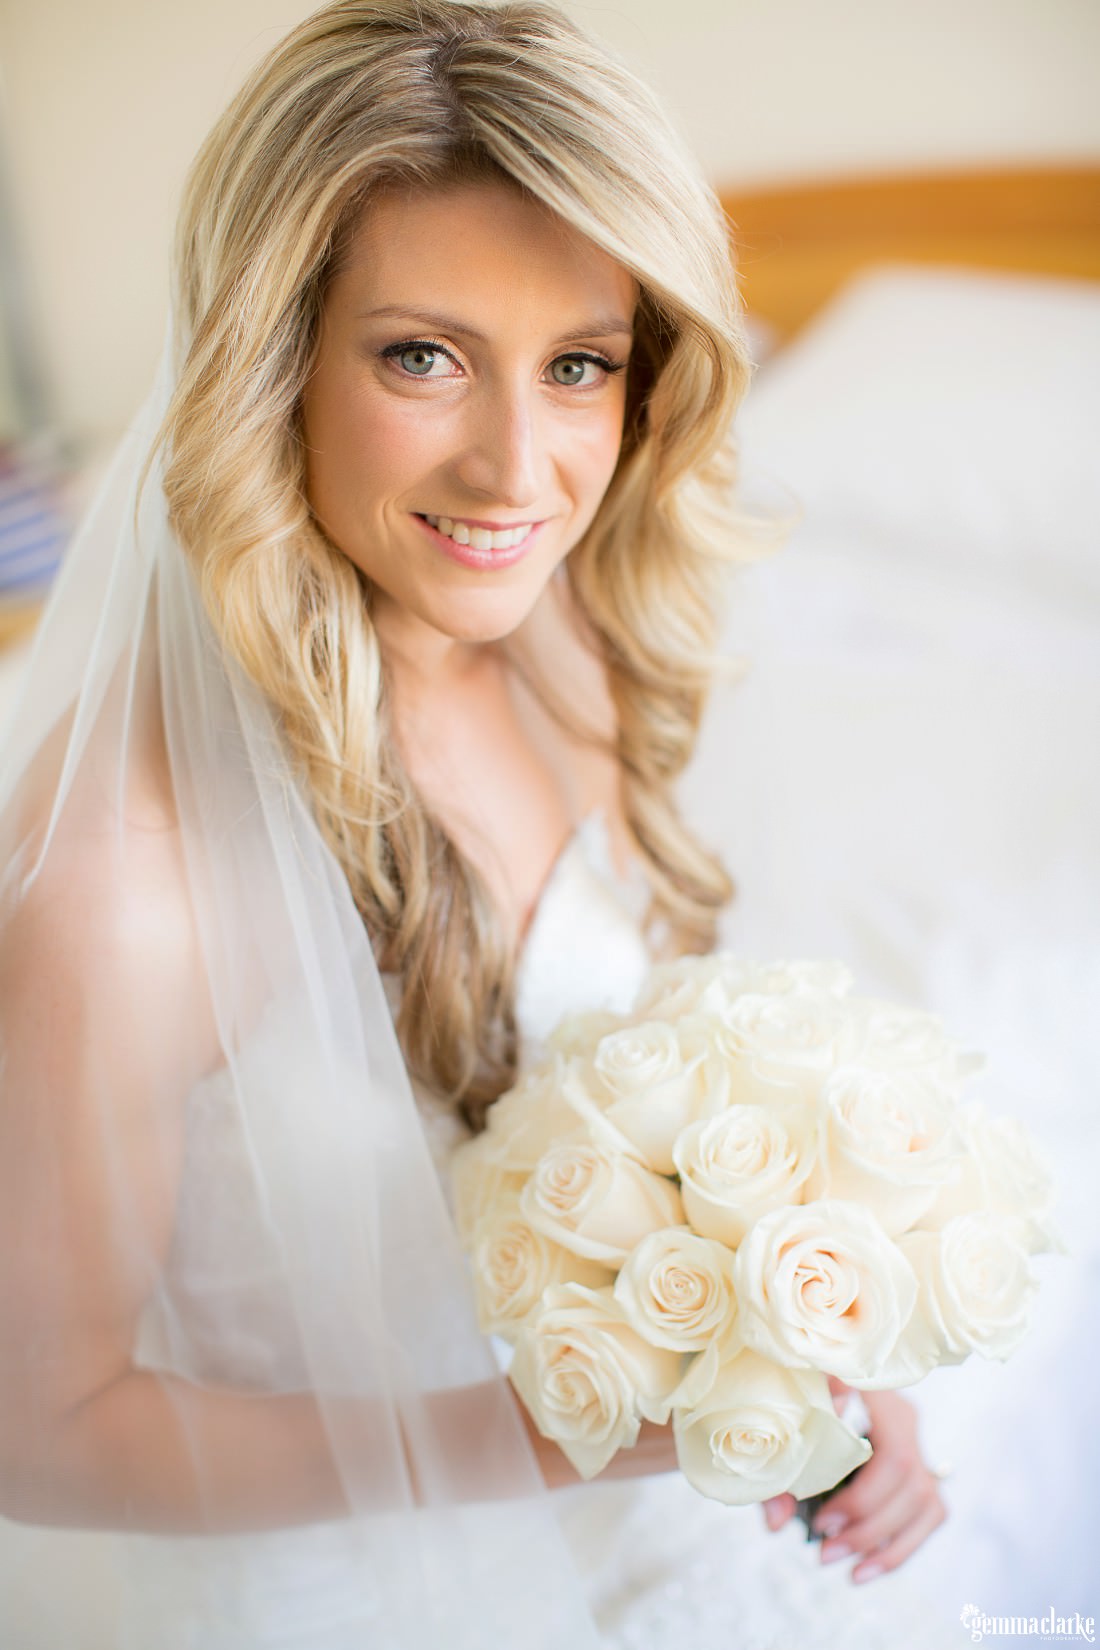 A smiling bride posing with her bouquet - Horizons Wedding